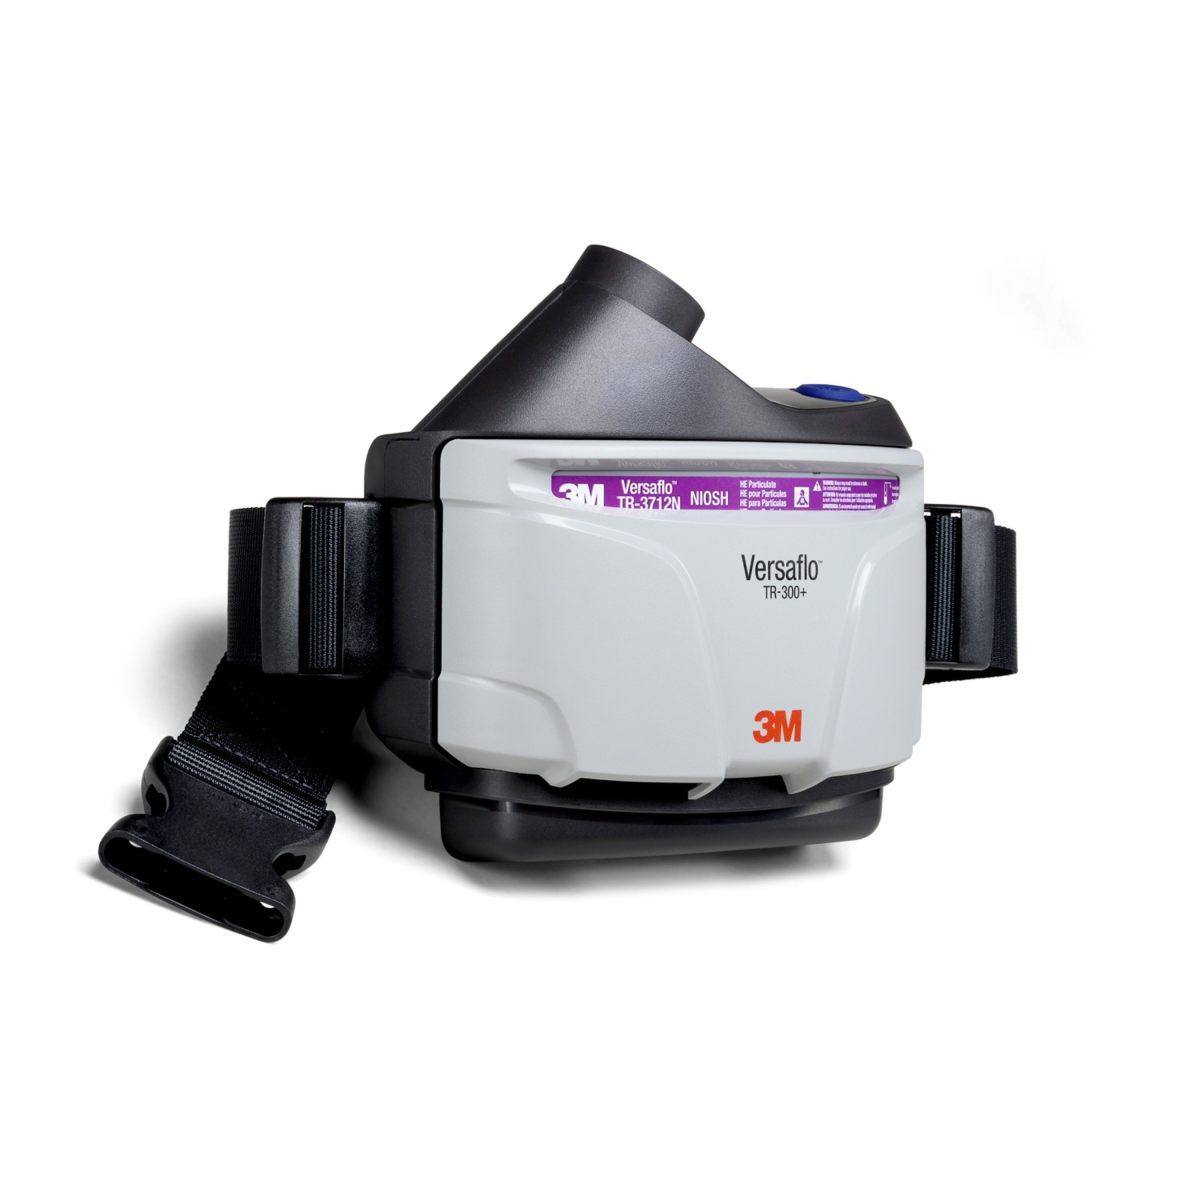 3M™ Versaflo™ TR-305N+ High Efficiency Powered Air Purifying Respirator Assembly (Availability restrictions apply.)